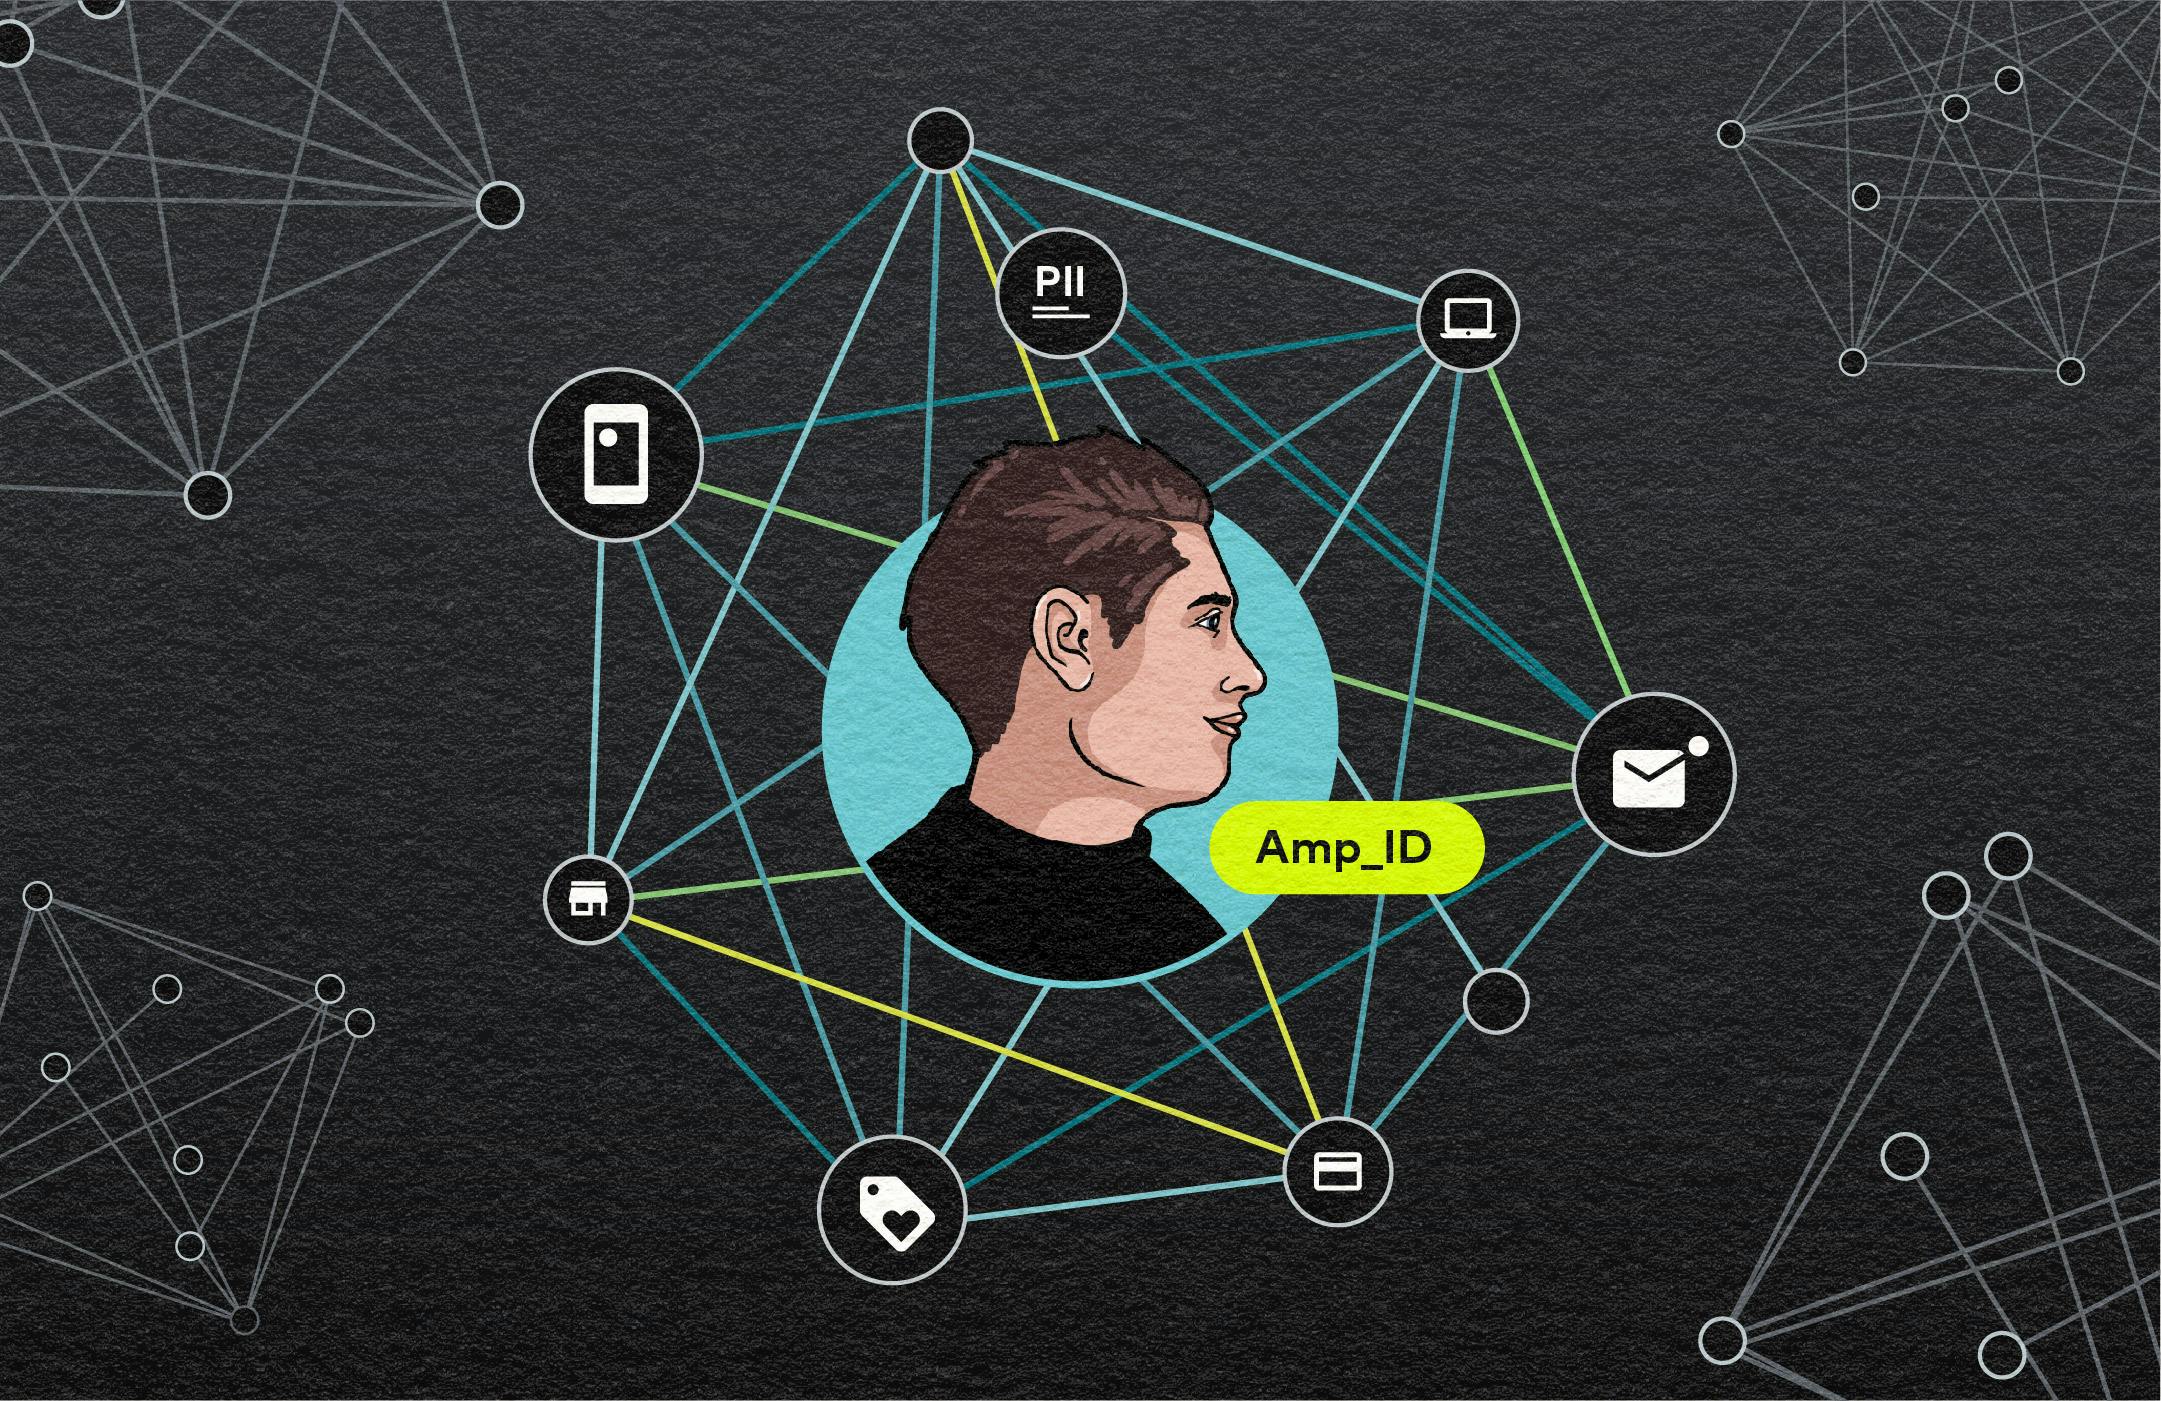 Illustration of a person having their data connected through the identity resolution process